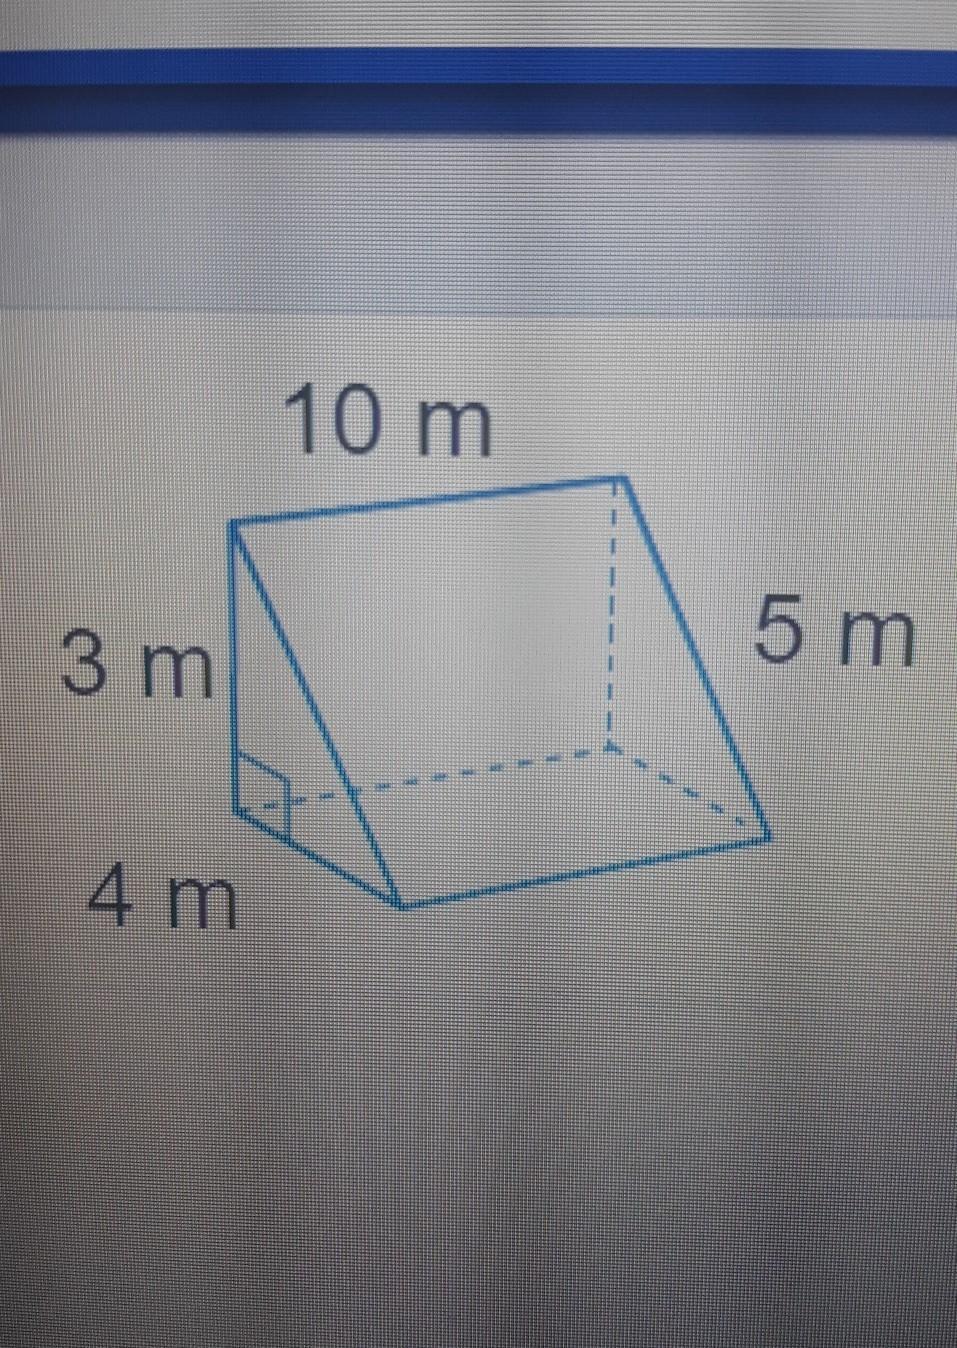 Find The Surface Area Of The Prism. The Surface Area Is